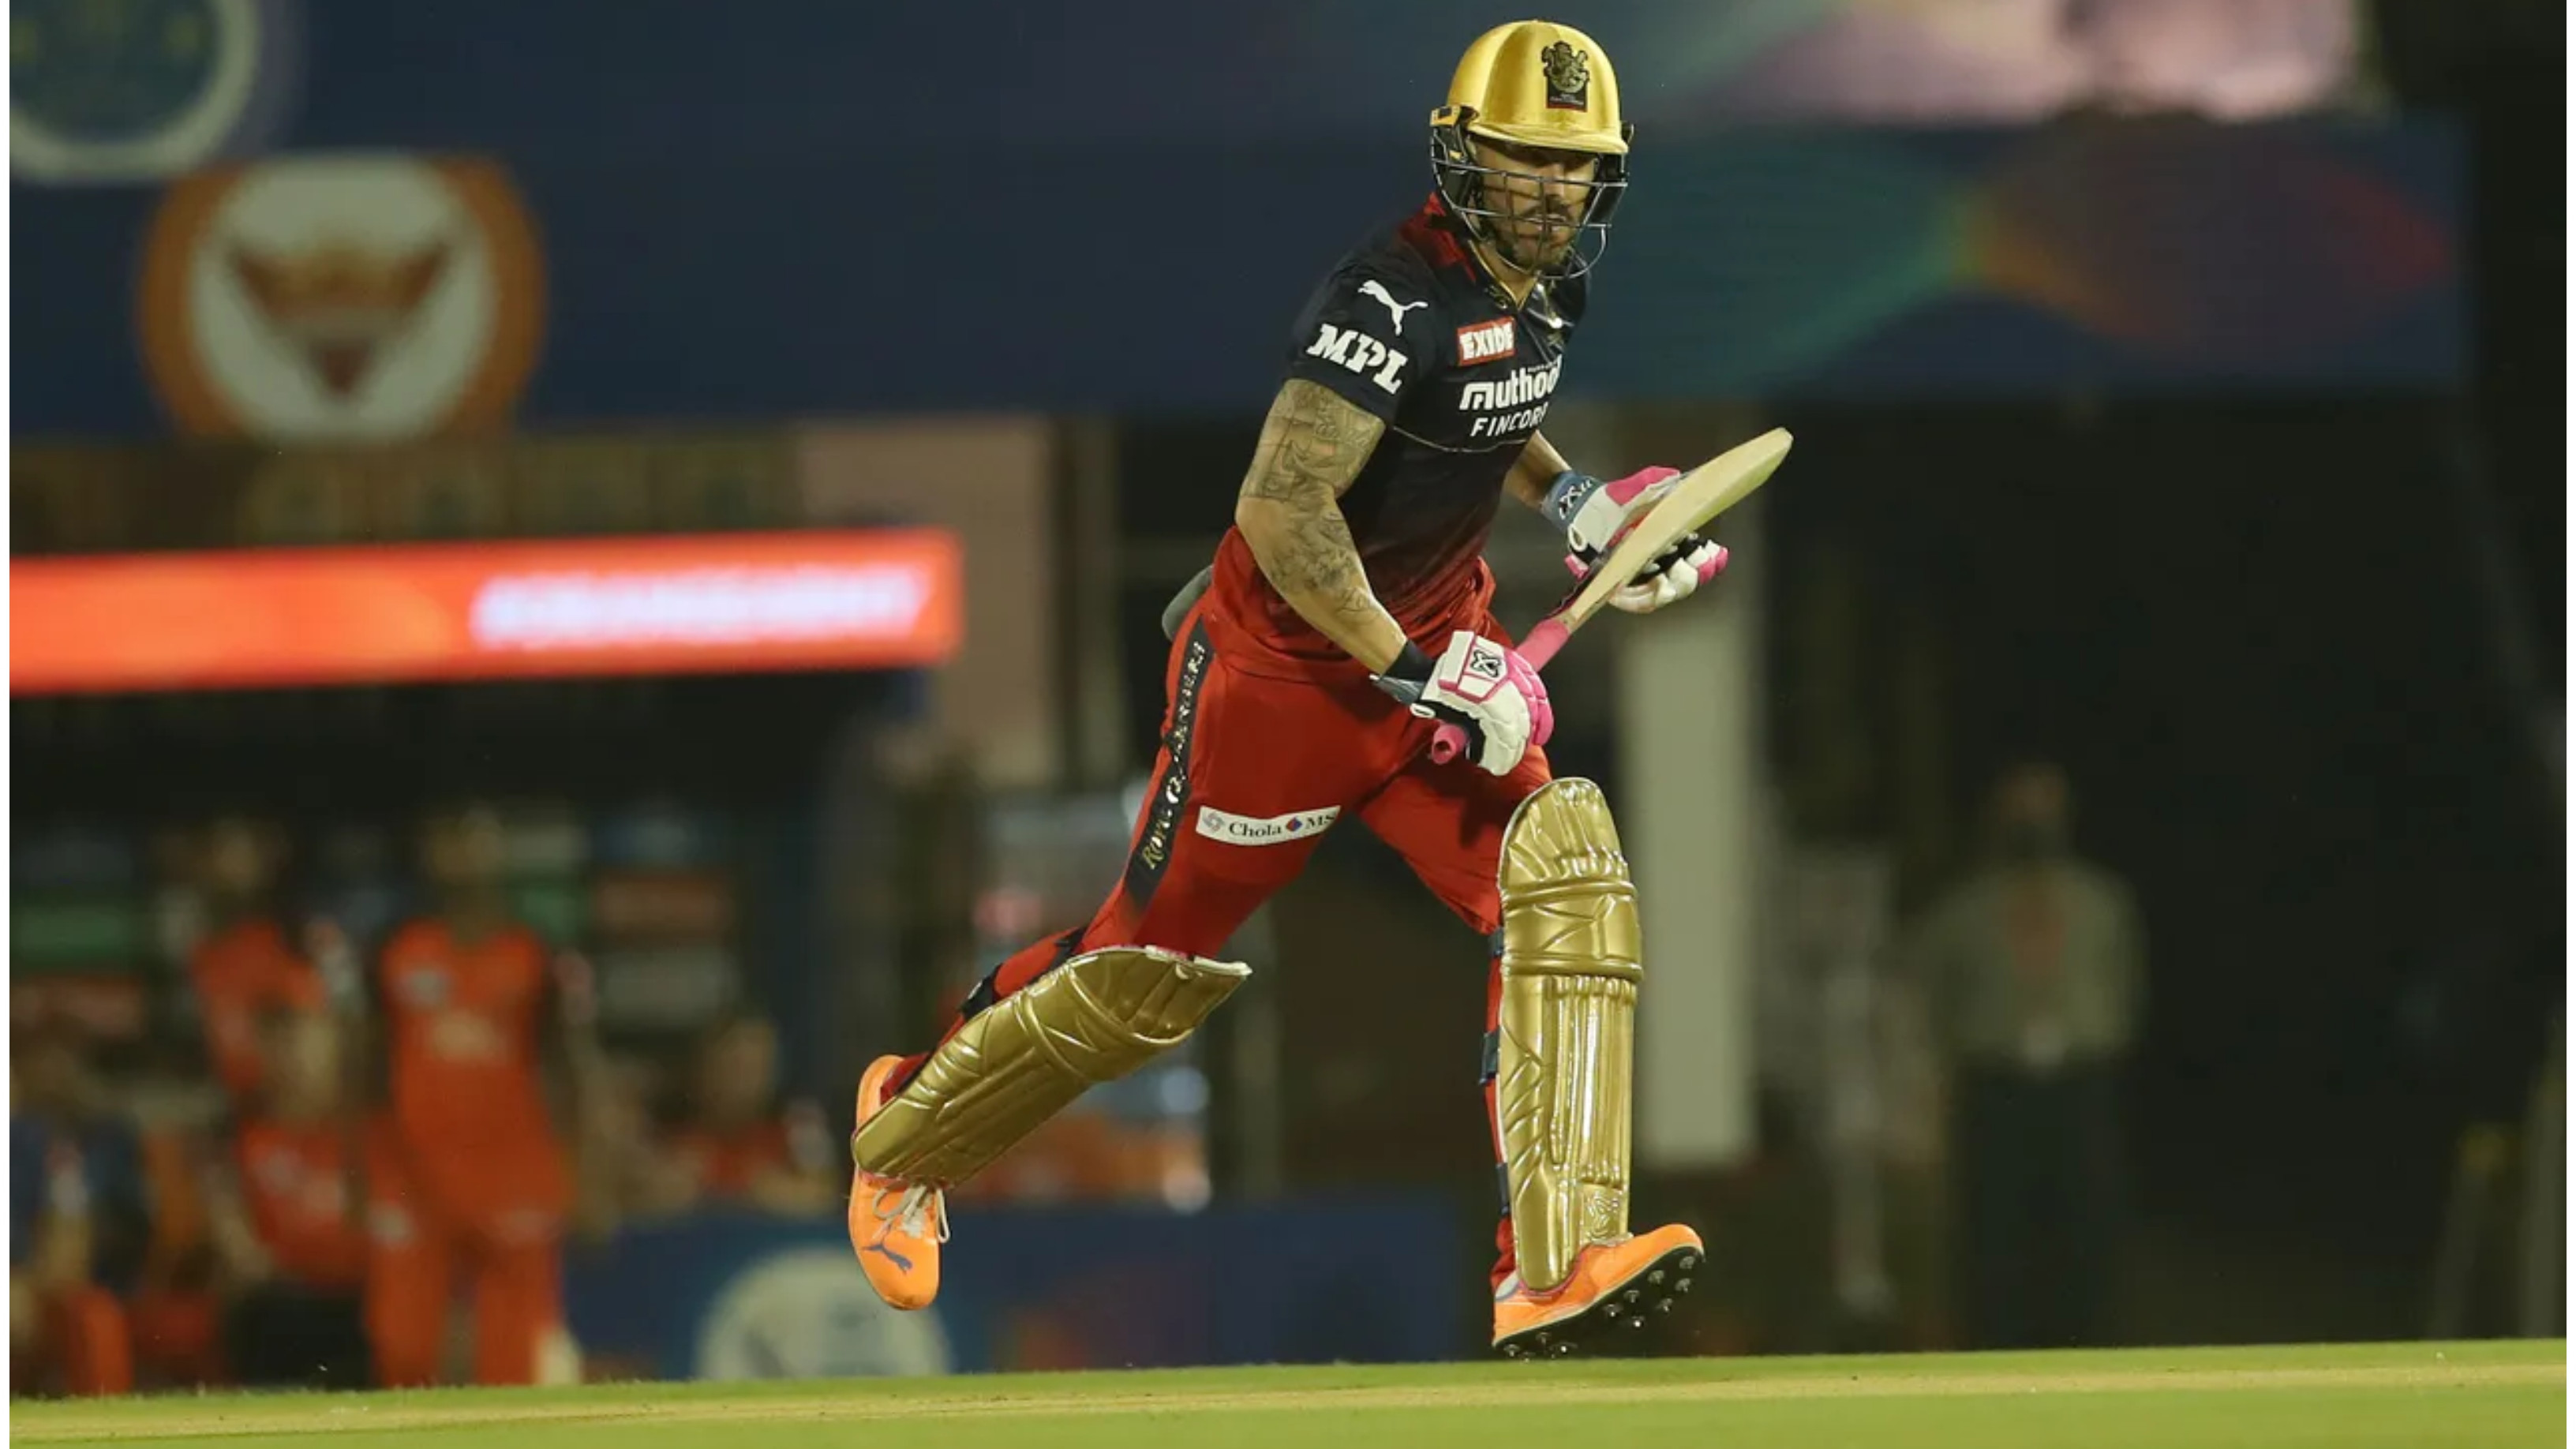 IPL 2022: We shouldn’t have lost so many wickets in first 4 overs – Faf du Plessis after RCB’s huge loss to SRH